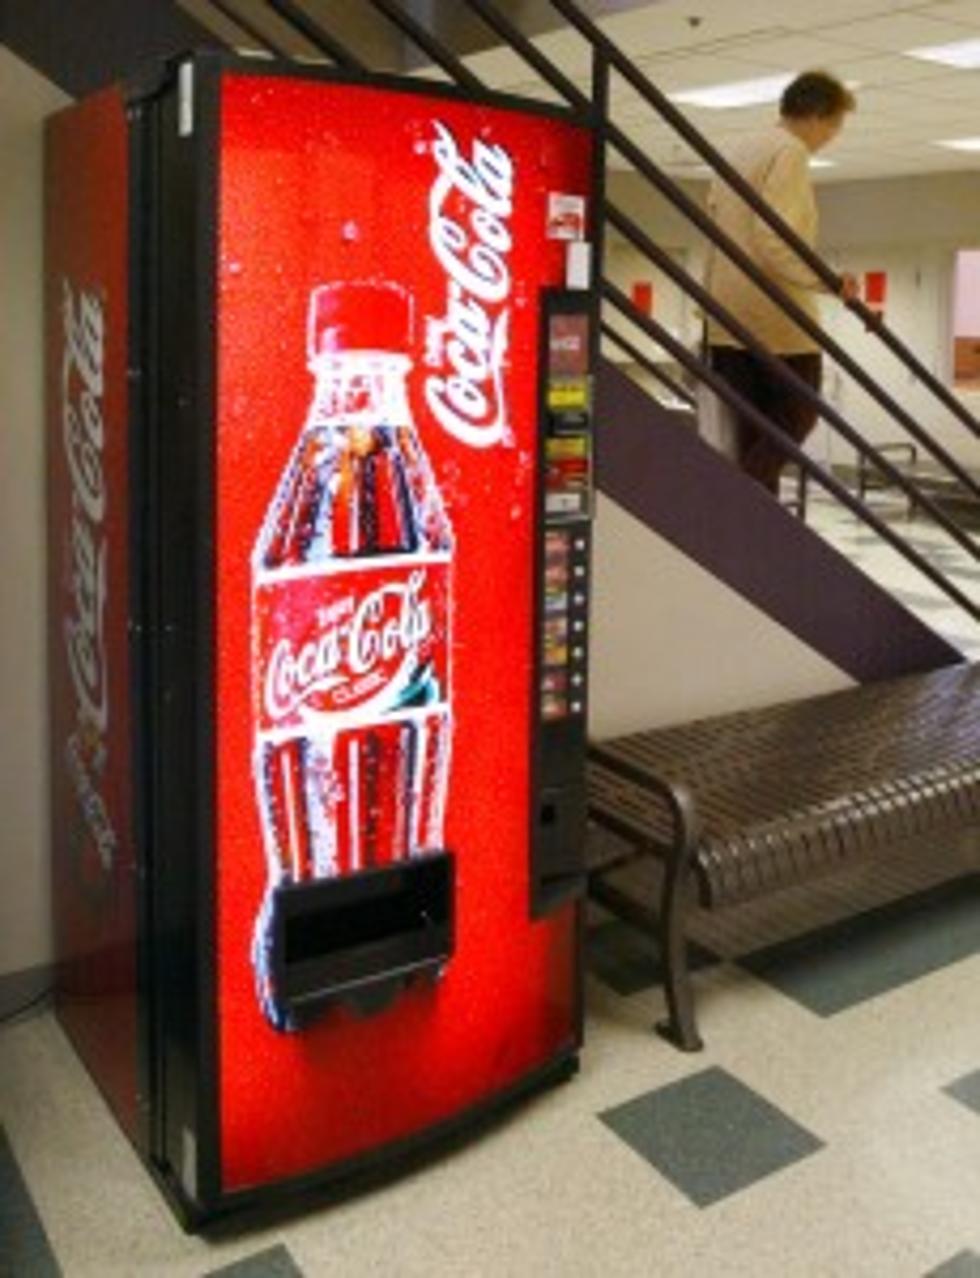 Police Say Man Was Touching Self by Soda Machine